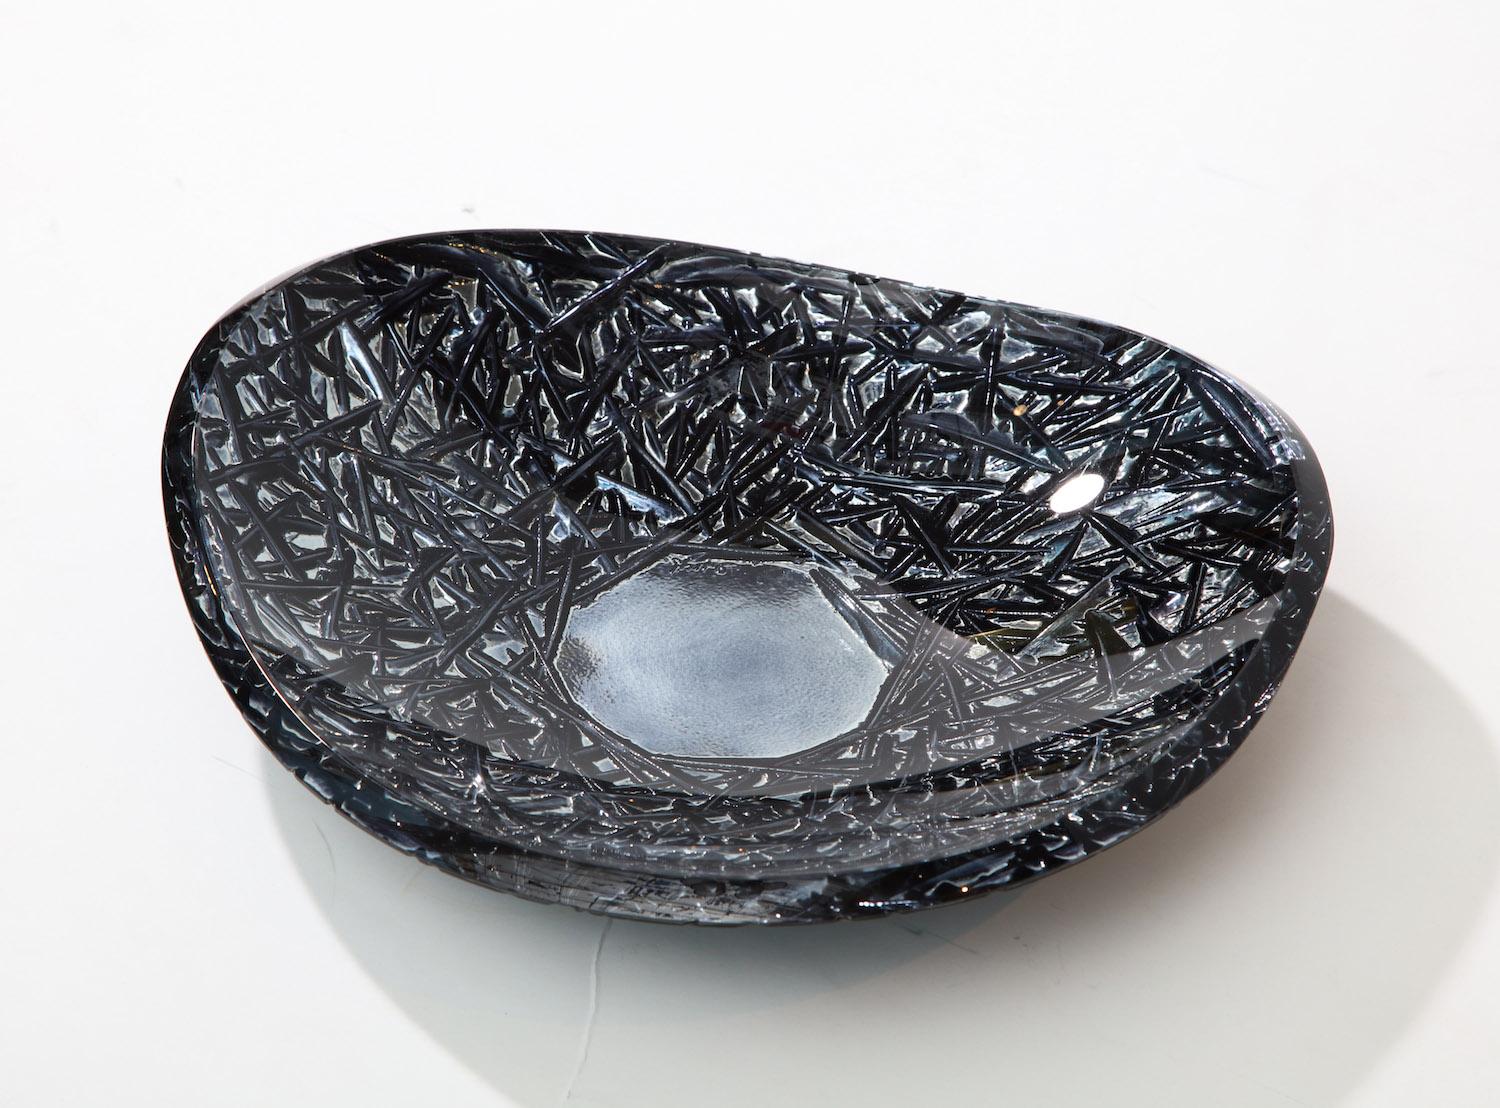 Studio-Made Carved Glass Dish by Ghiró Studio, Large For Sale 1